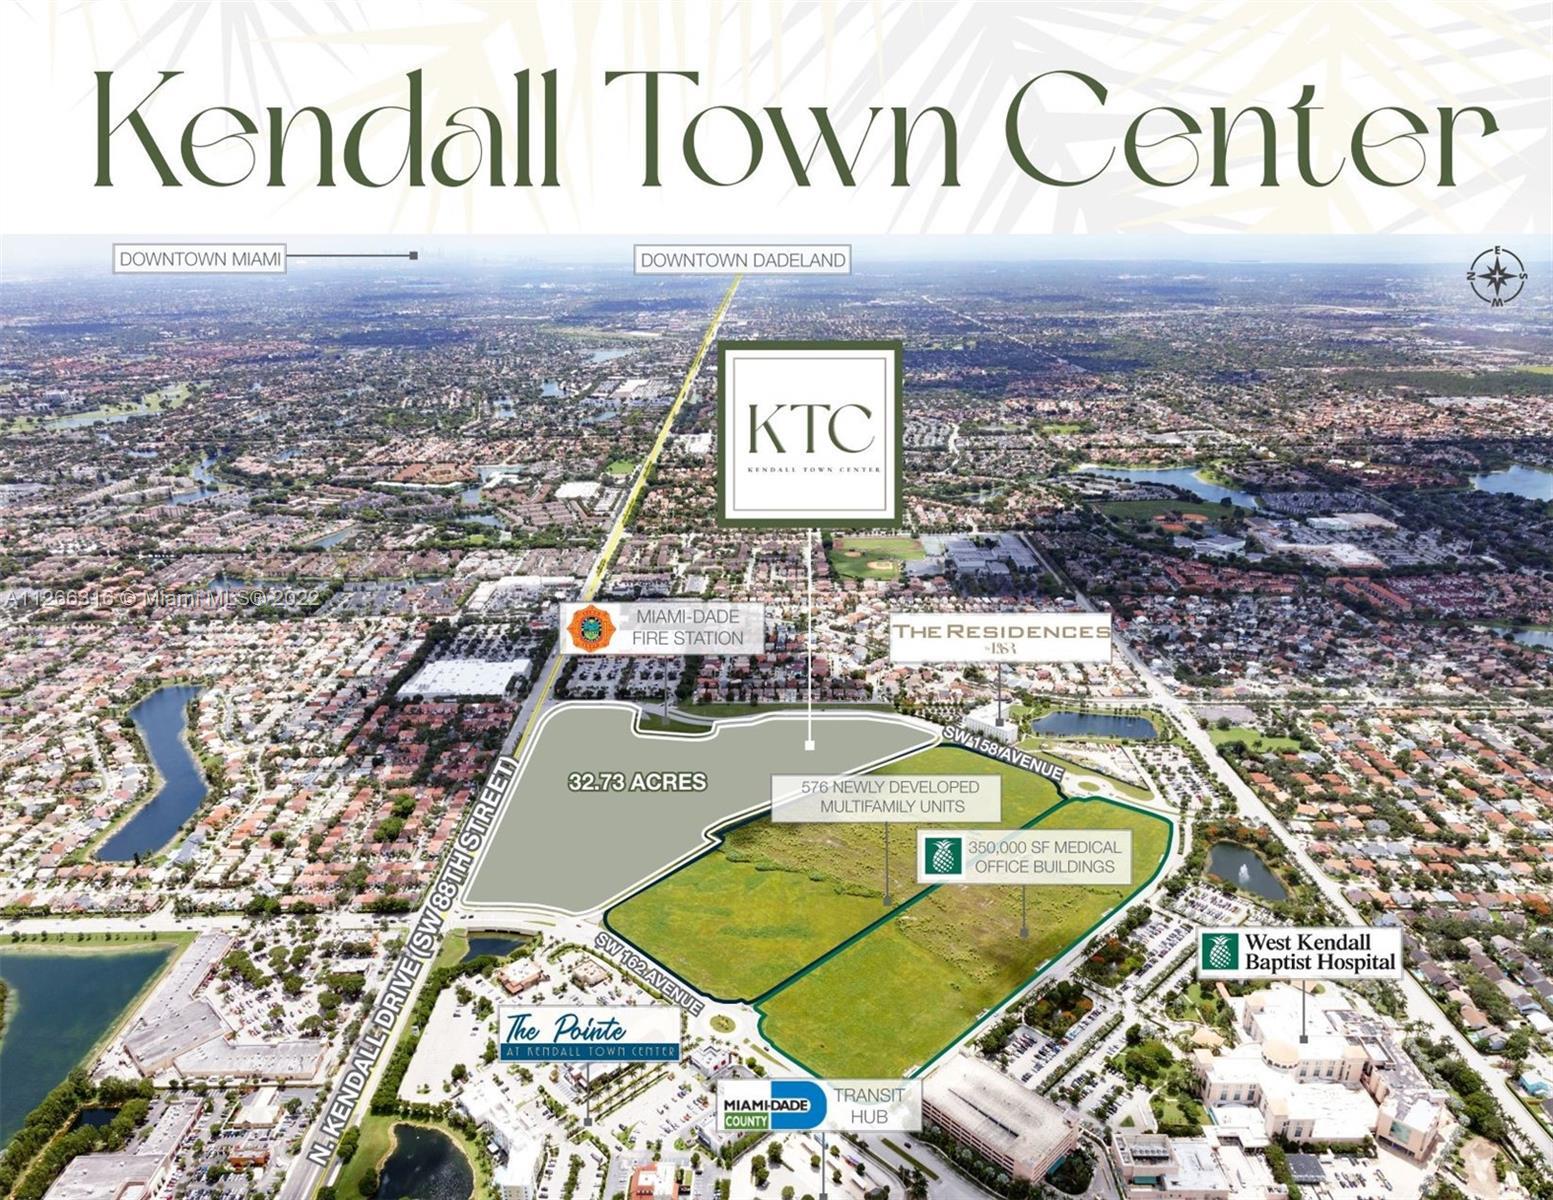 Kendall Town Center (KTC) is the last remaining sizable commercial parcel in Miami suitable for a ma